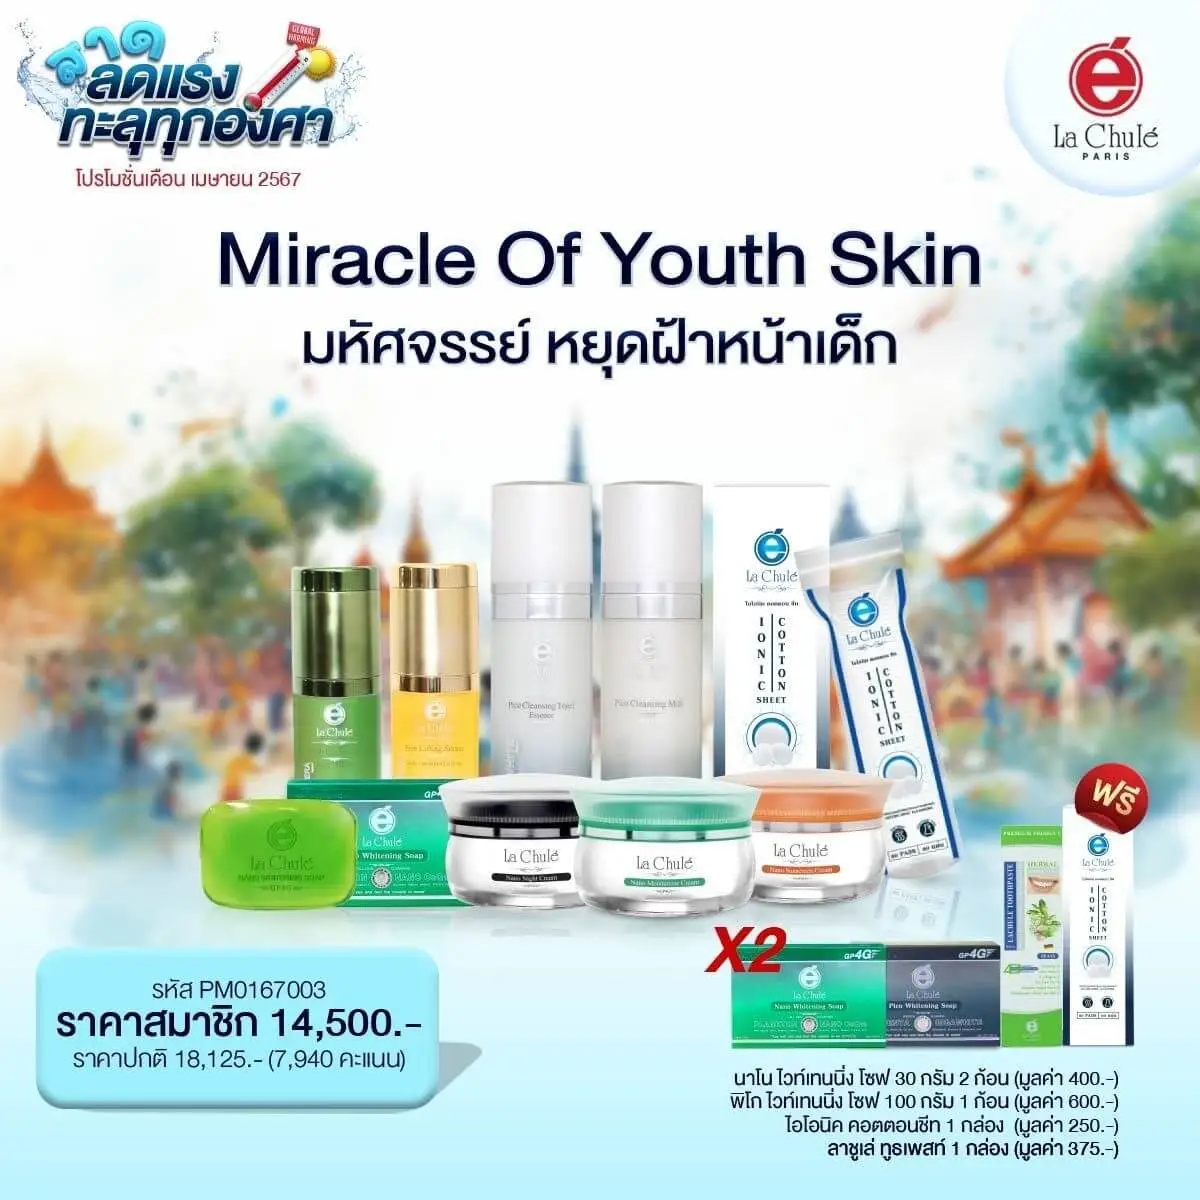 Miracle of Youth Skin , stop melasma, baby face 